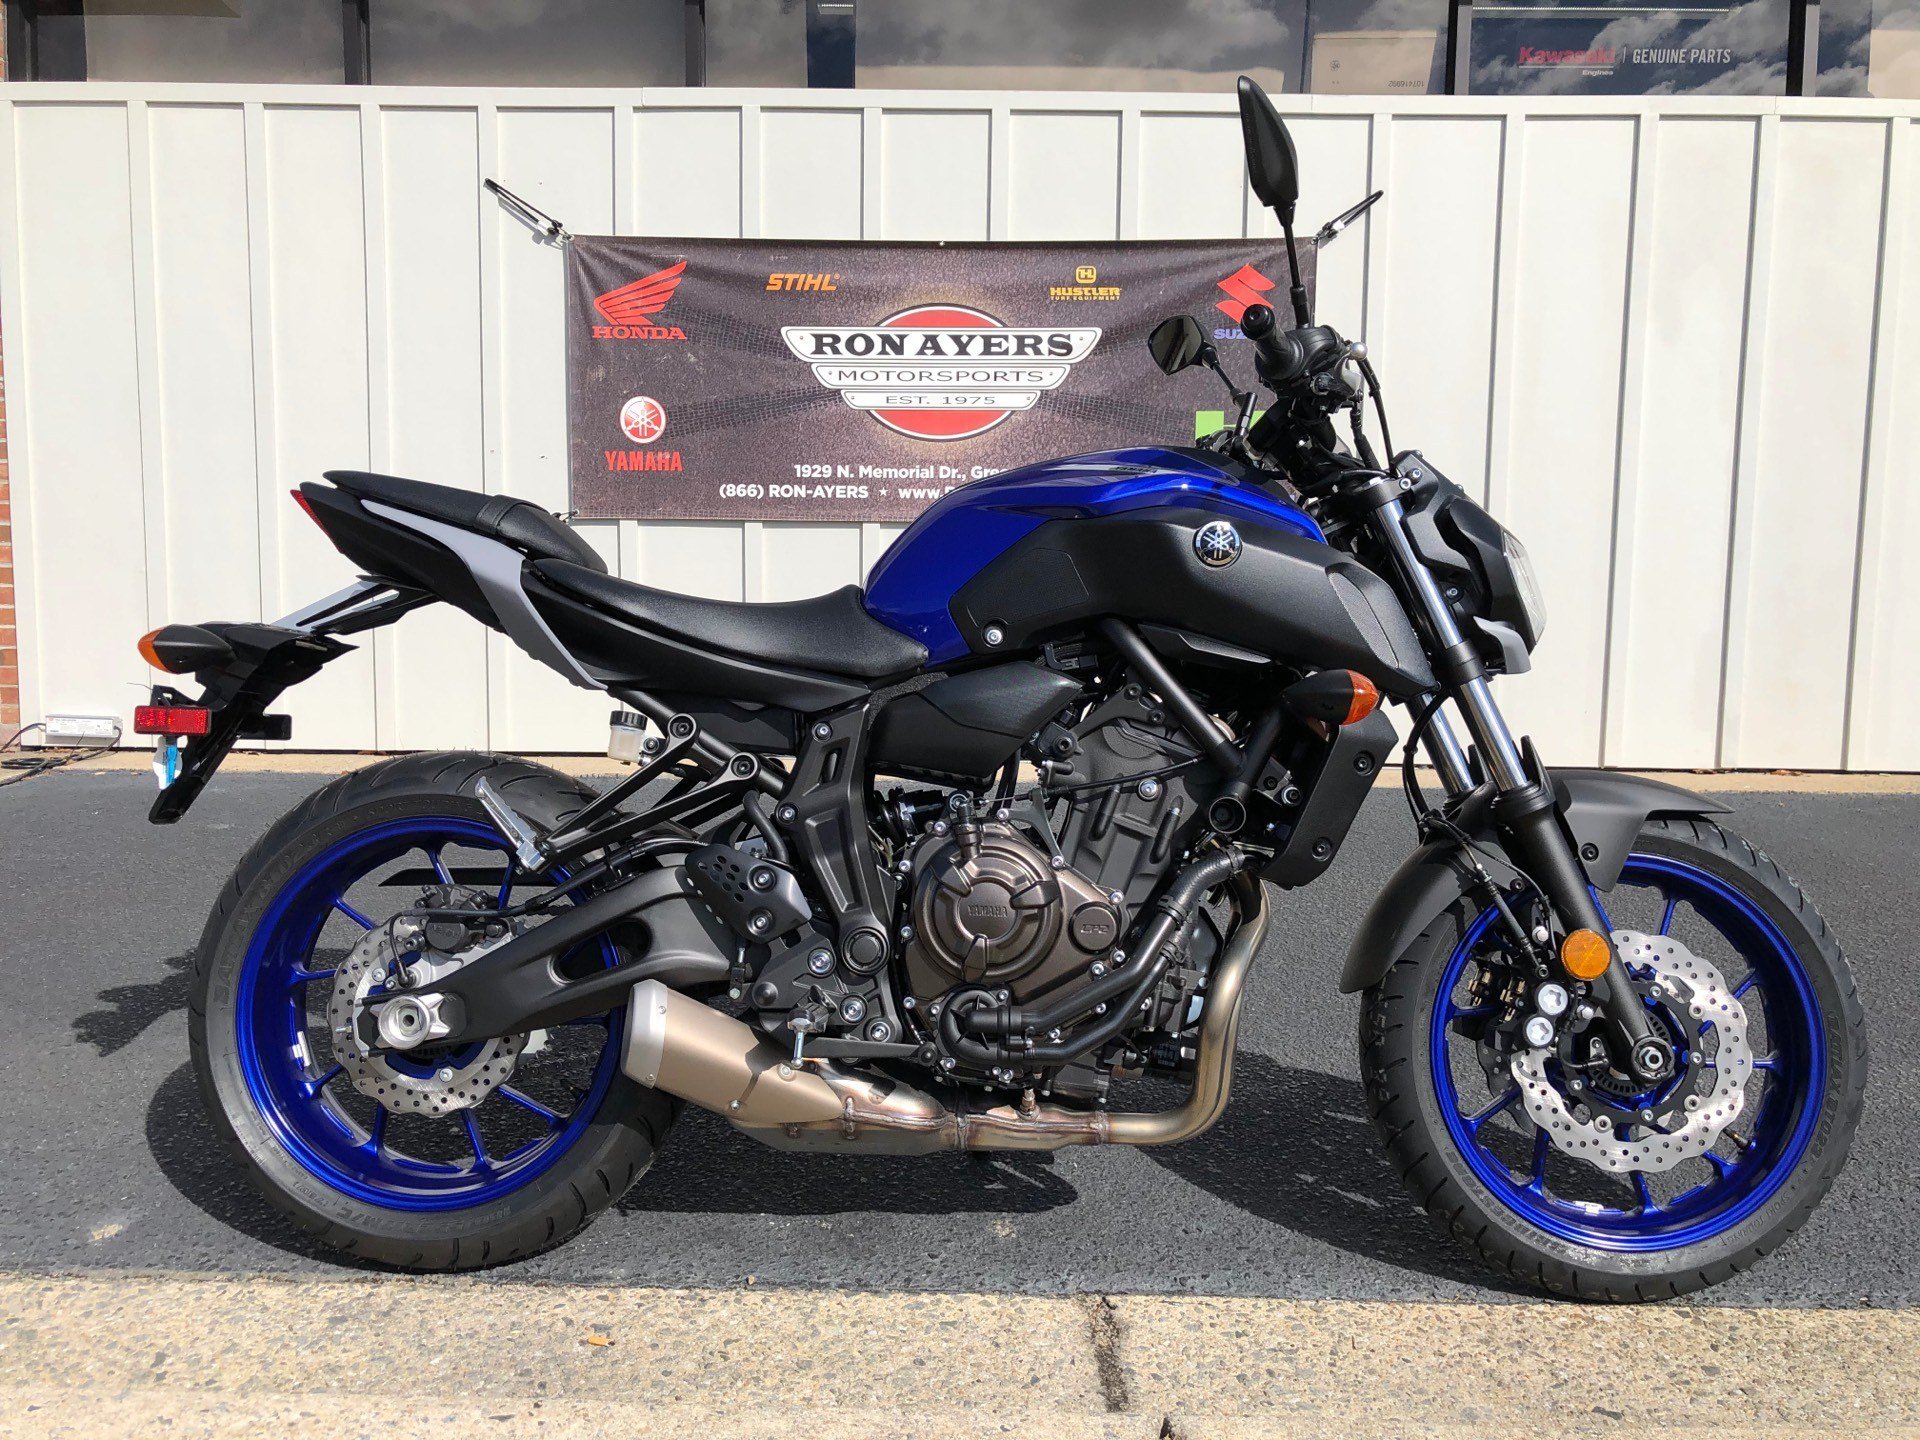 New 2020 Yamaha Mt 07 Motorcycles In Greenville Nc Stock Number